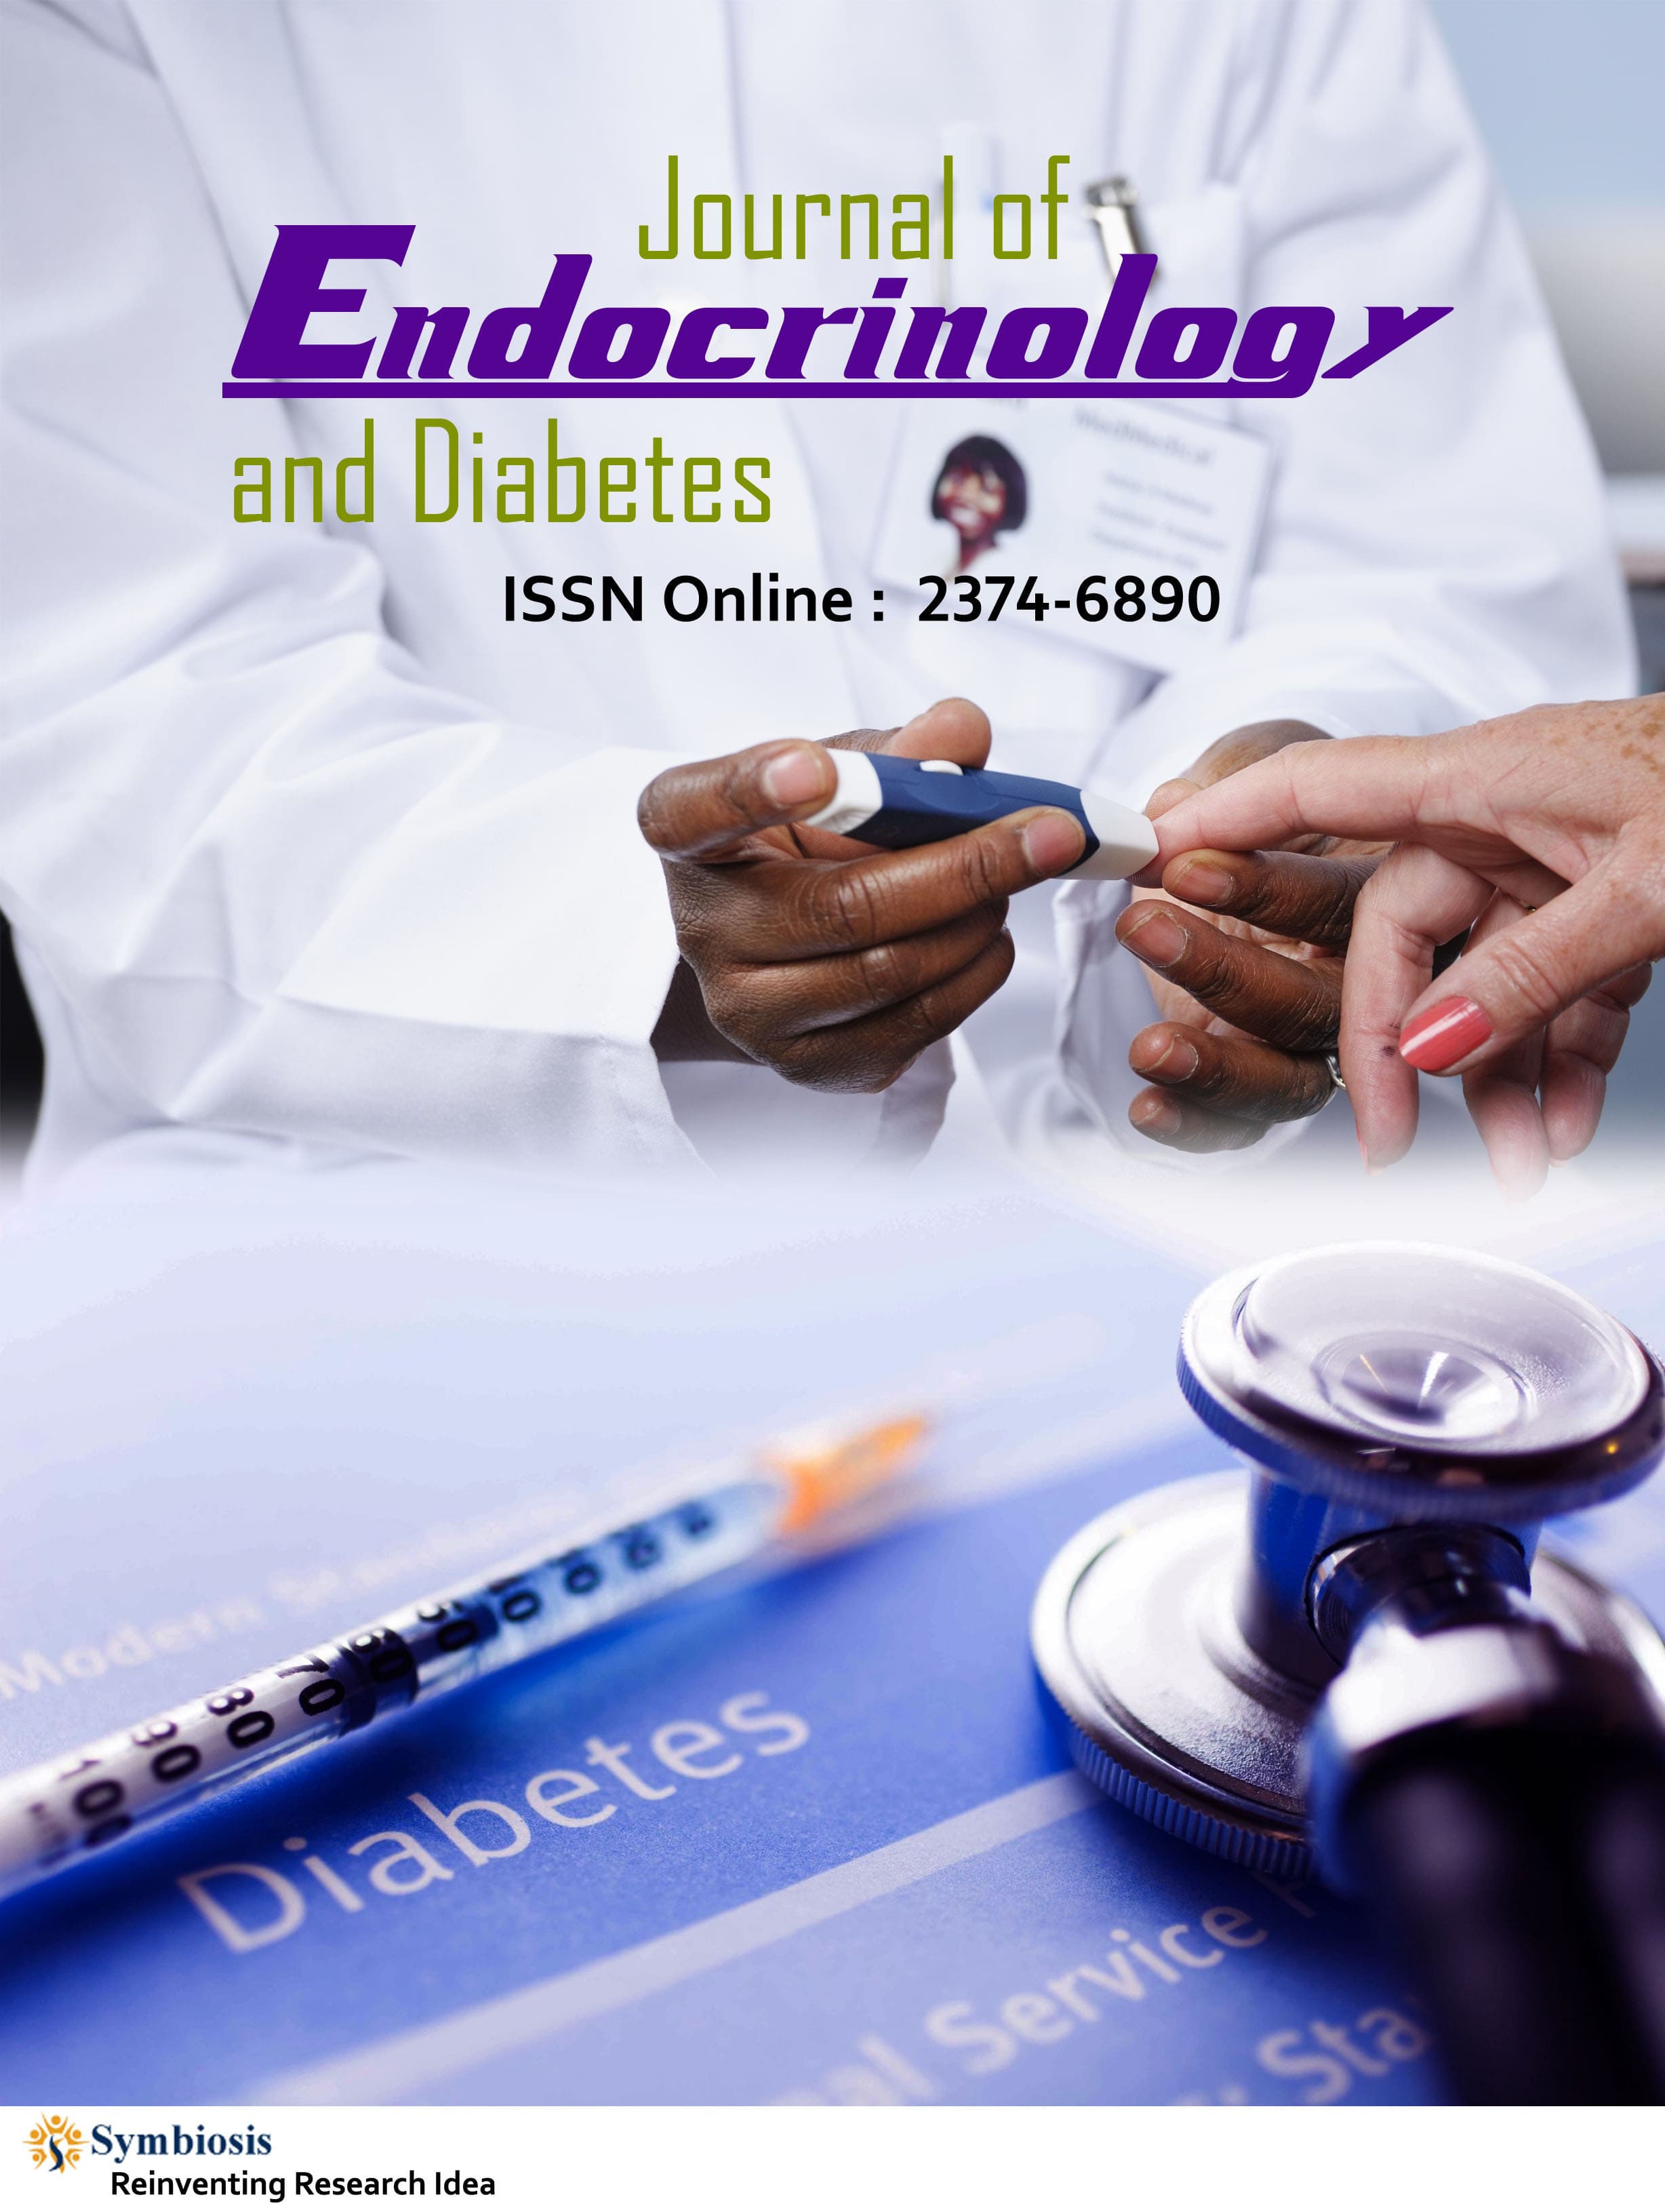 endocrinology and diabetes